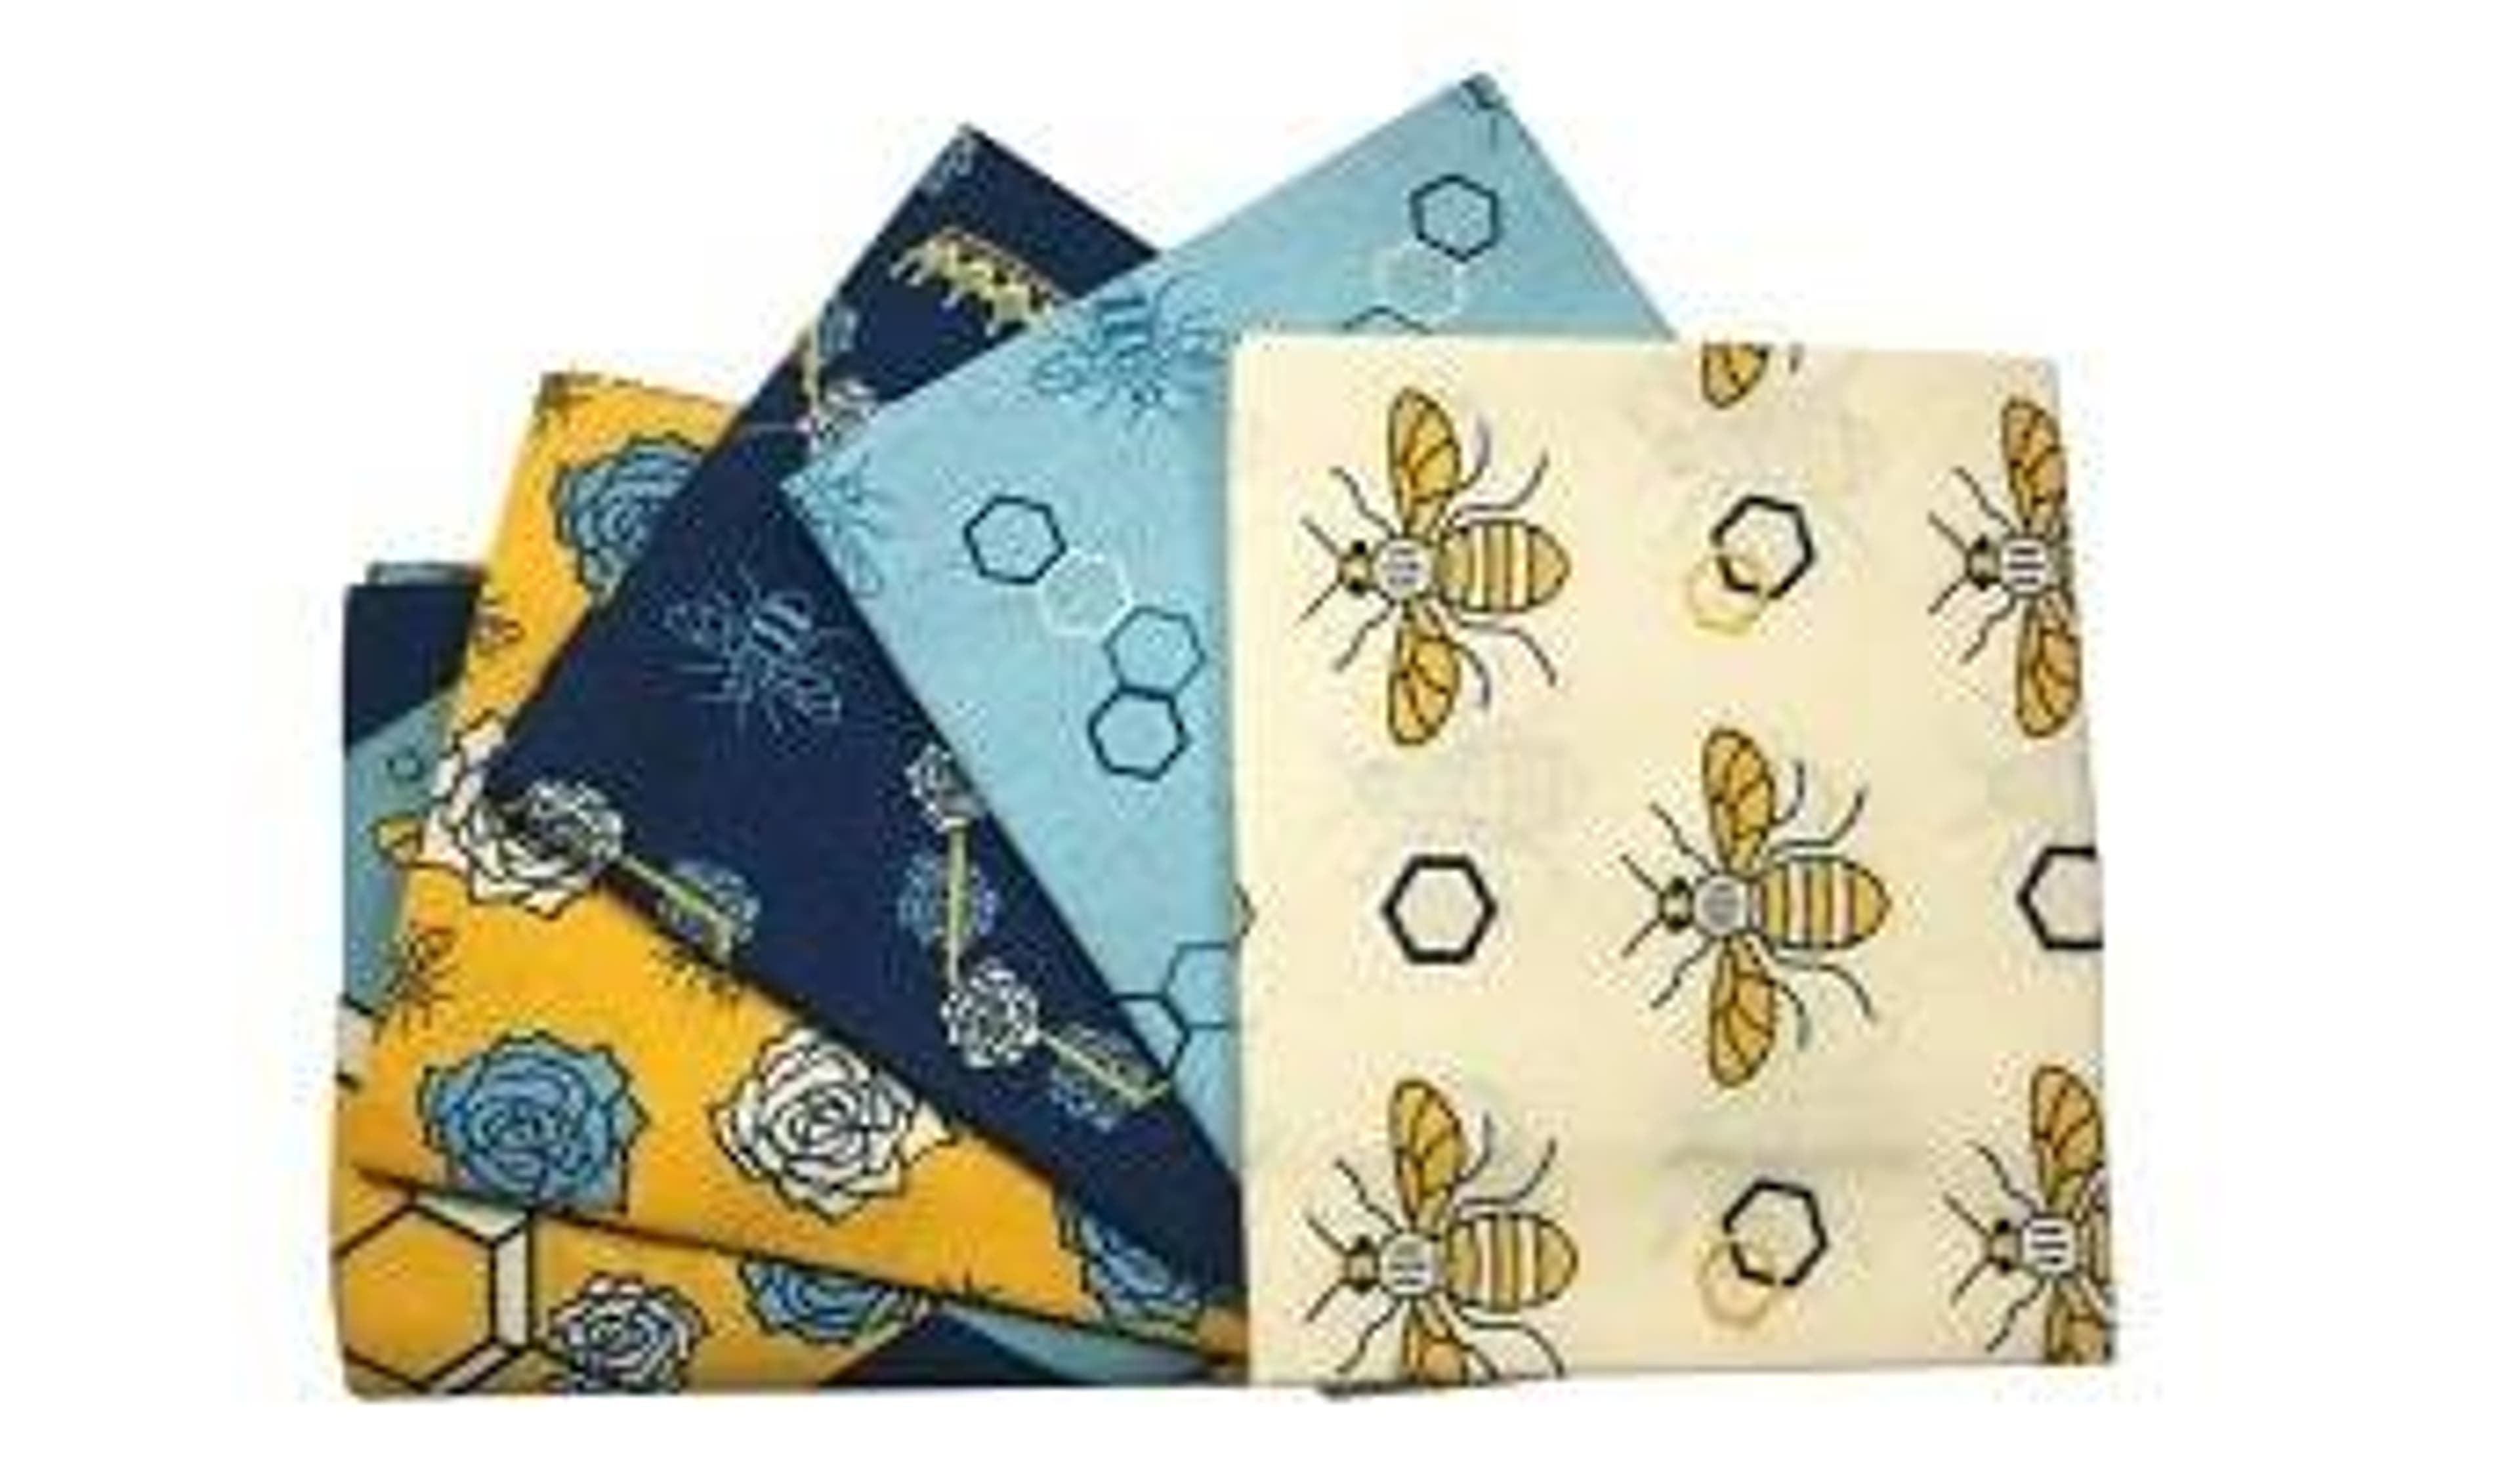  Patchwork Bee Cotton Fat Quarters 5 Pack at Hobbycraft 